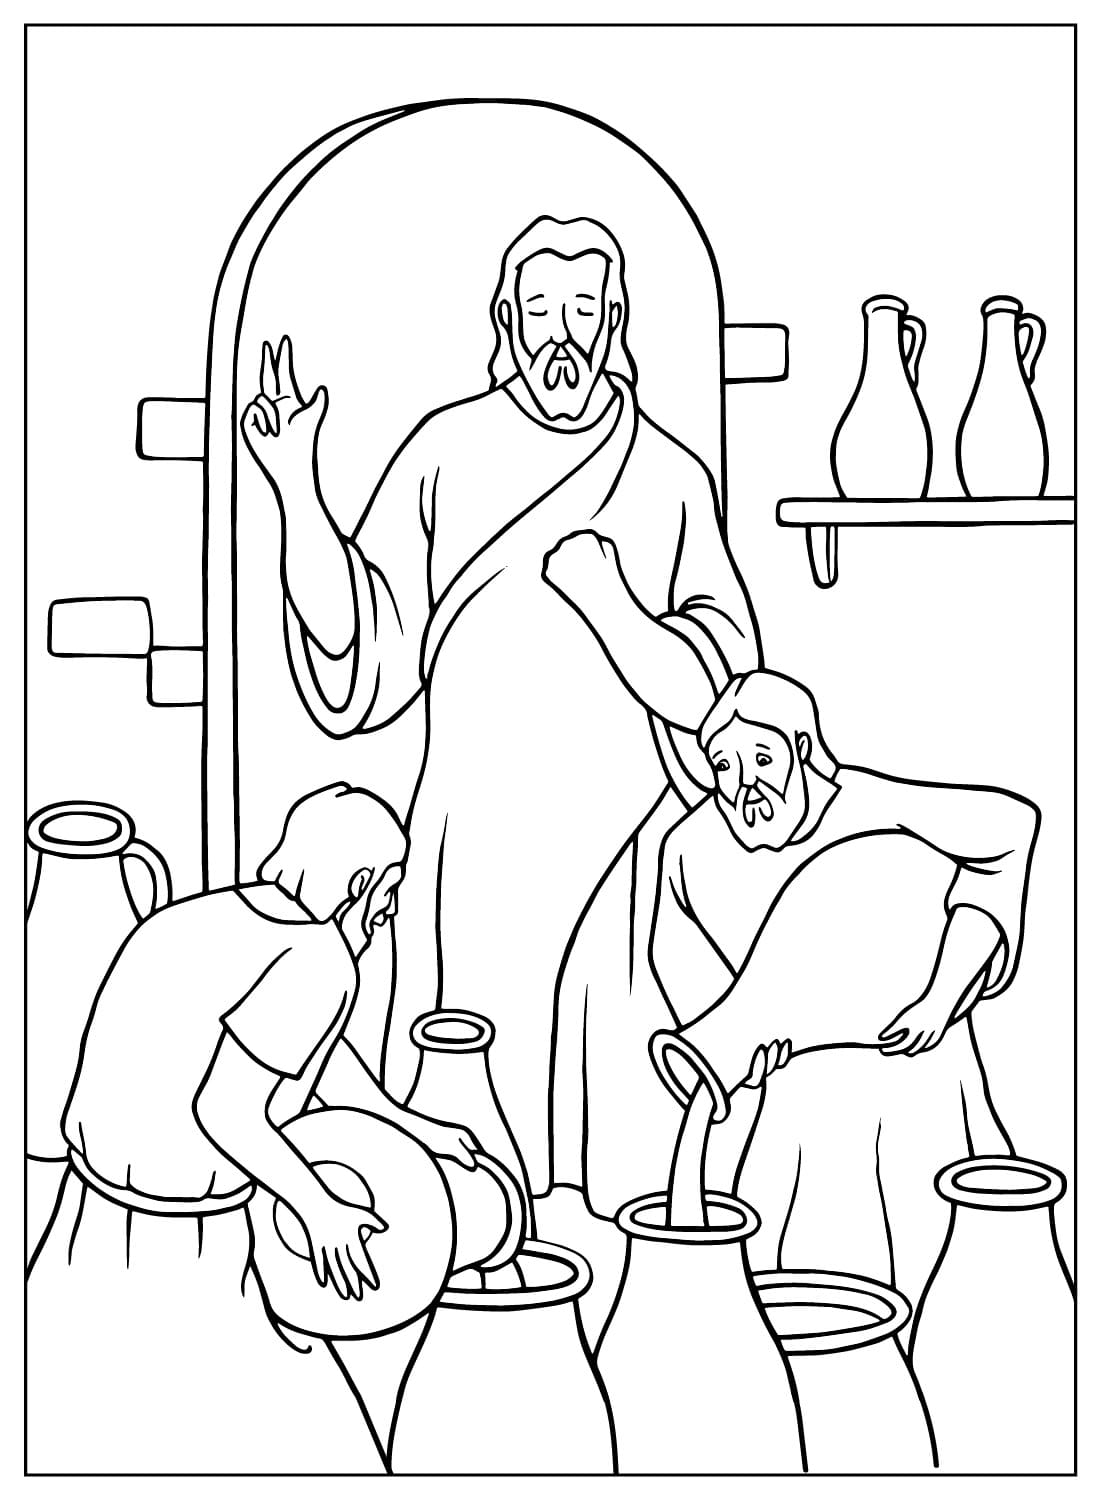 Jesus Turns Water into Wine Coloring Page from Jesus